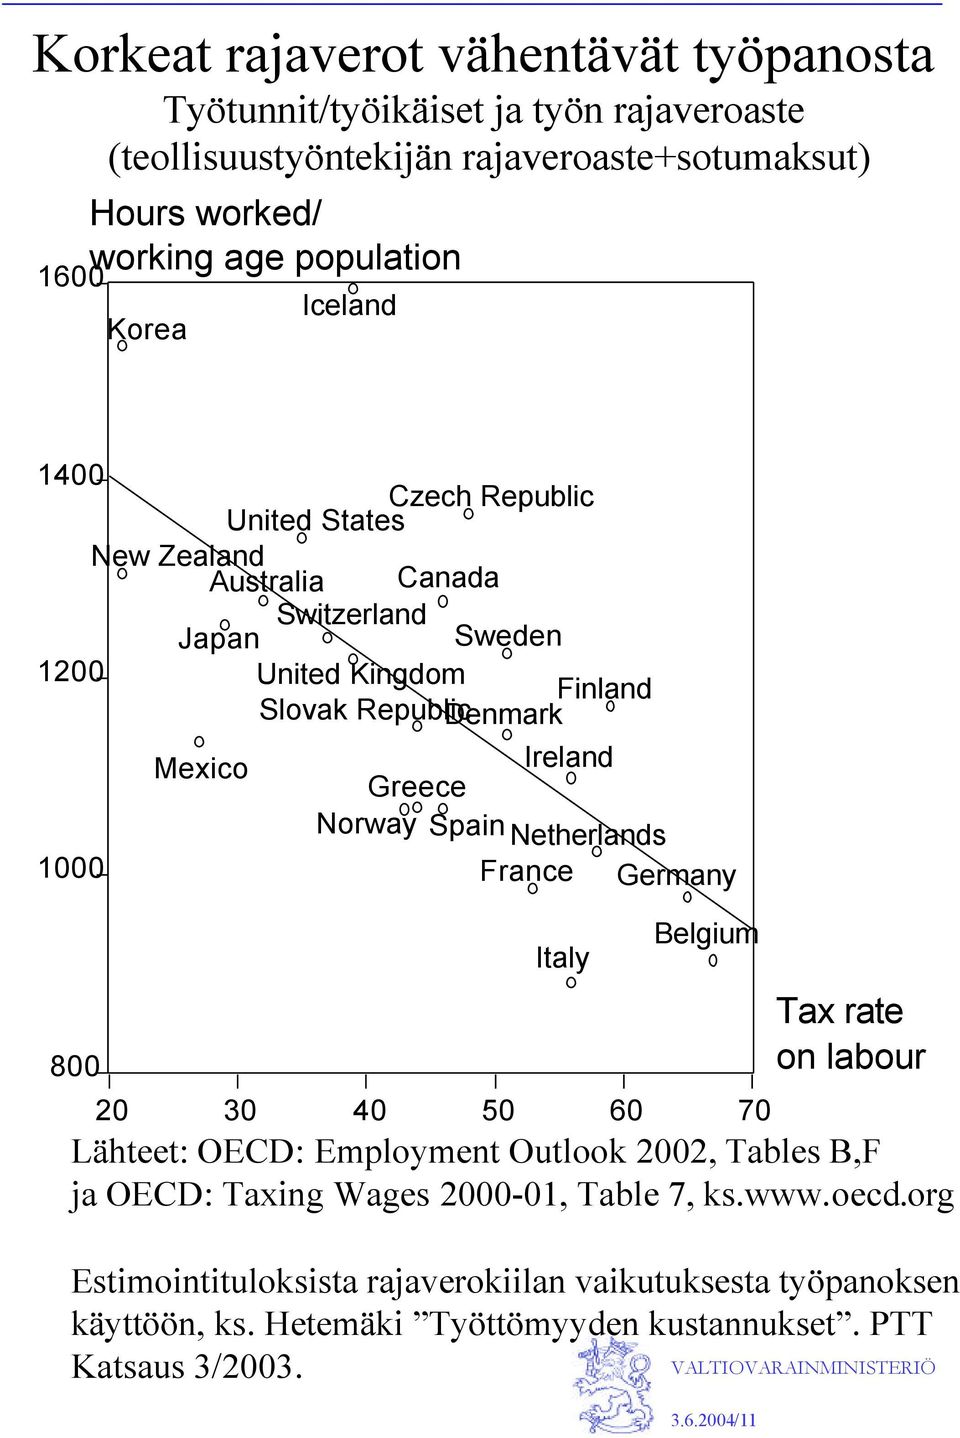 Ireland Greece Norway Spain Netherlands France Germany Italy Belgium 20 30 40 50 60 70 Tax rate on labour Lähteet: OECD: Employment Outlook 2002, Tables B,F ja OECD: Taxing